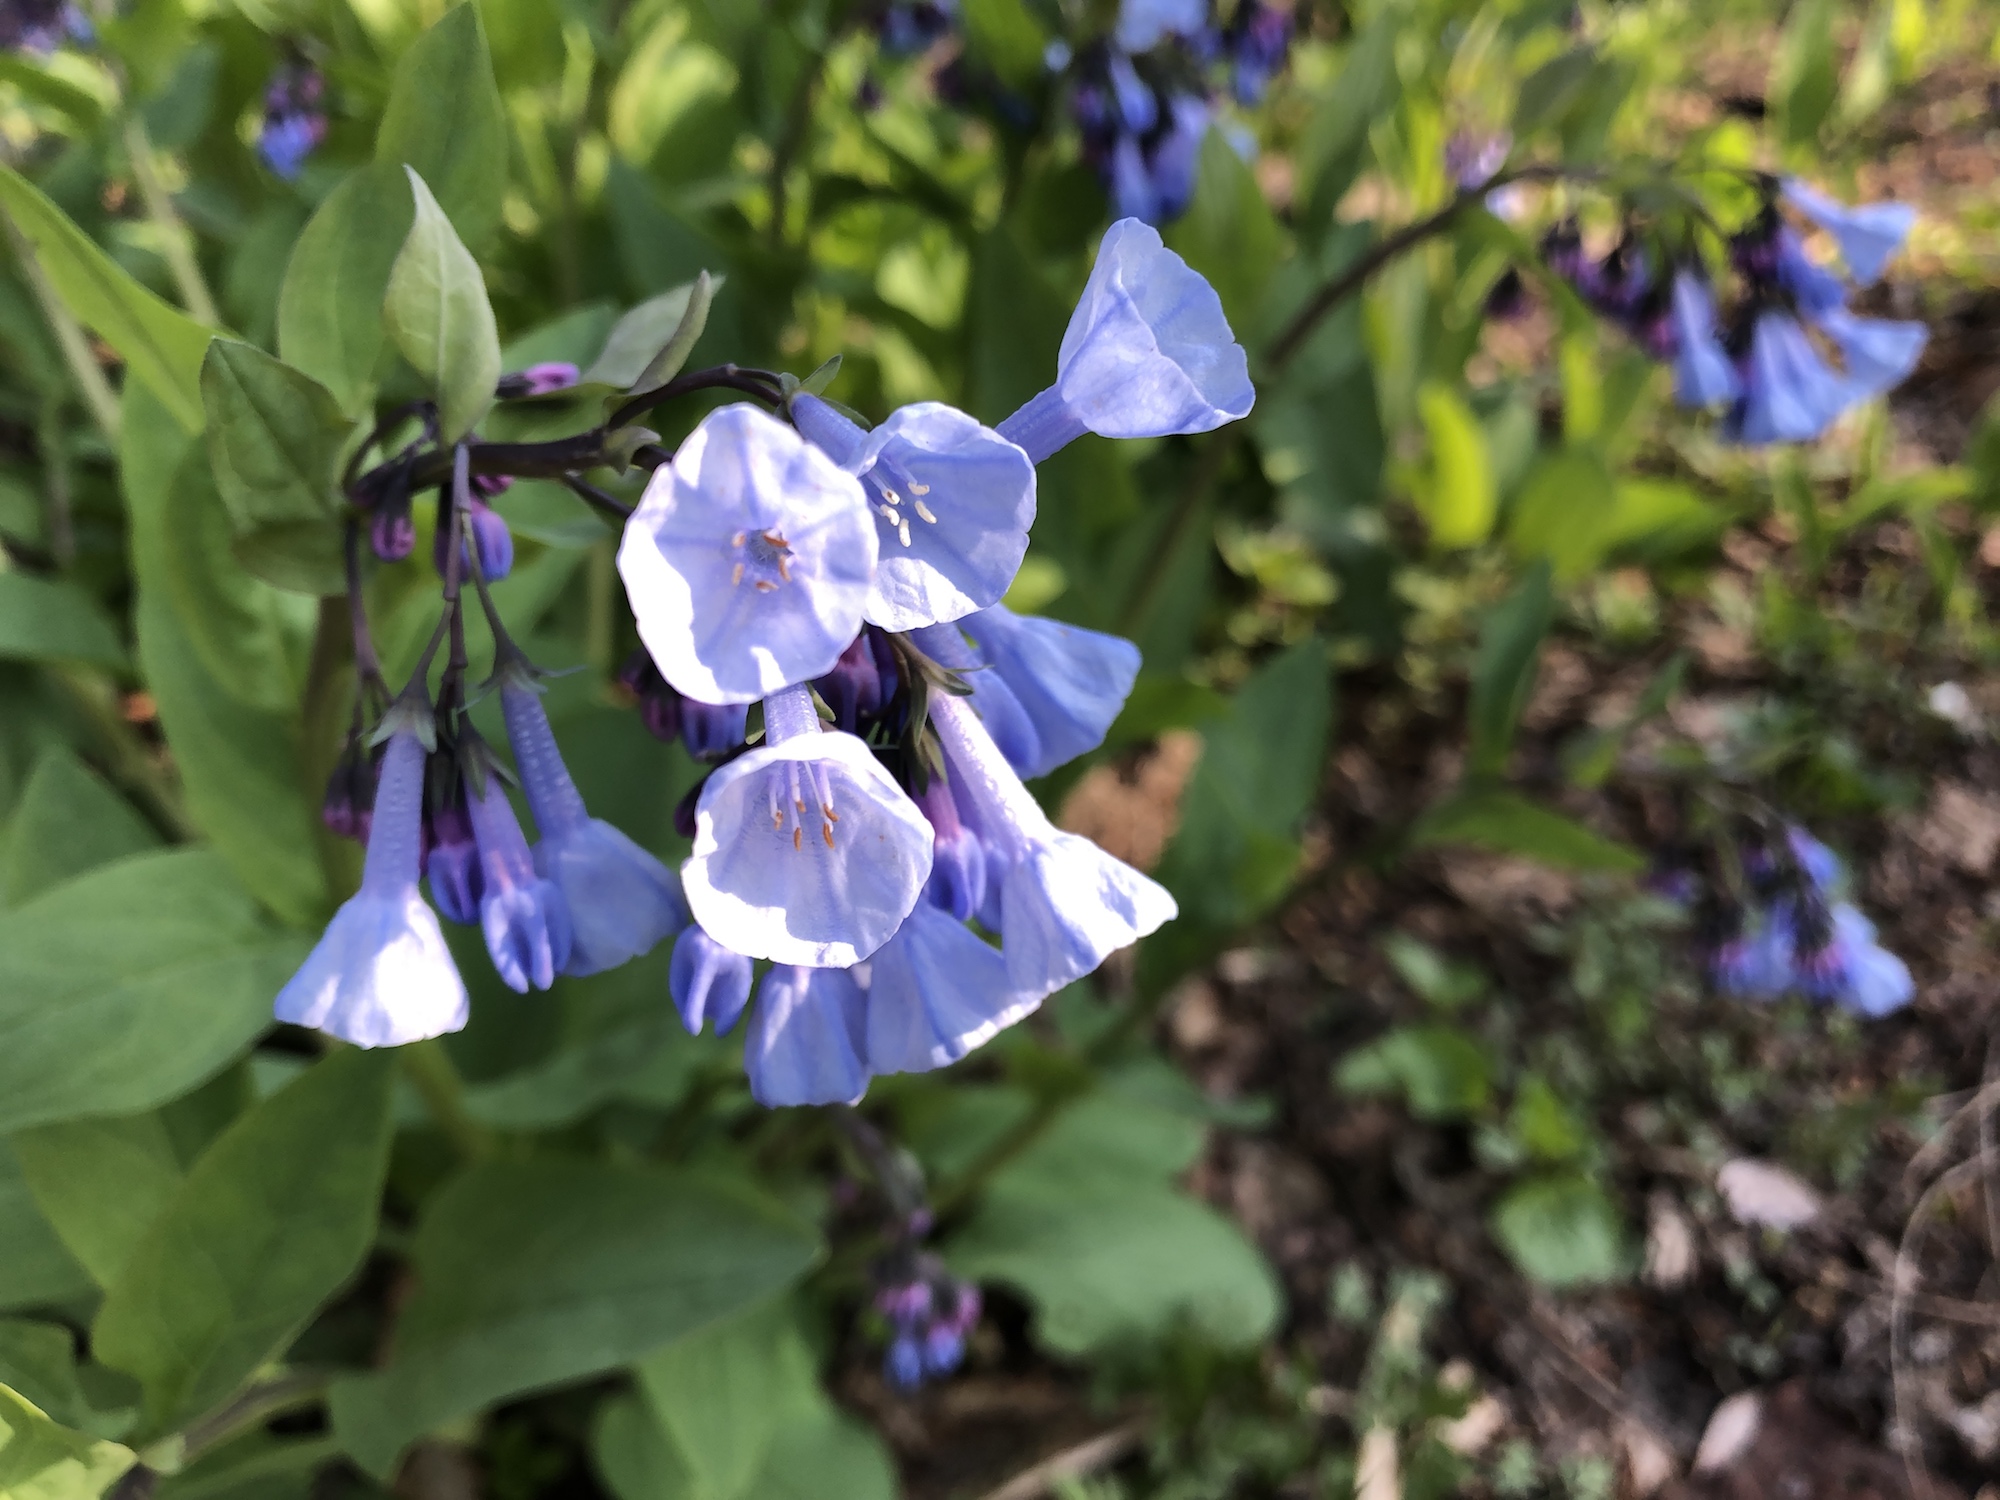 Virginia Bluebells around the Duck Pond in Madison, Wisconsin on April 25, 2019.